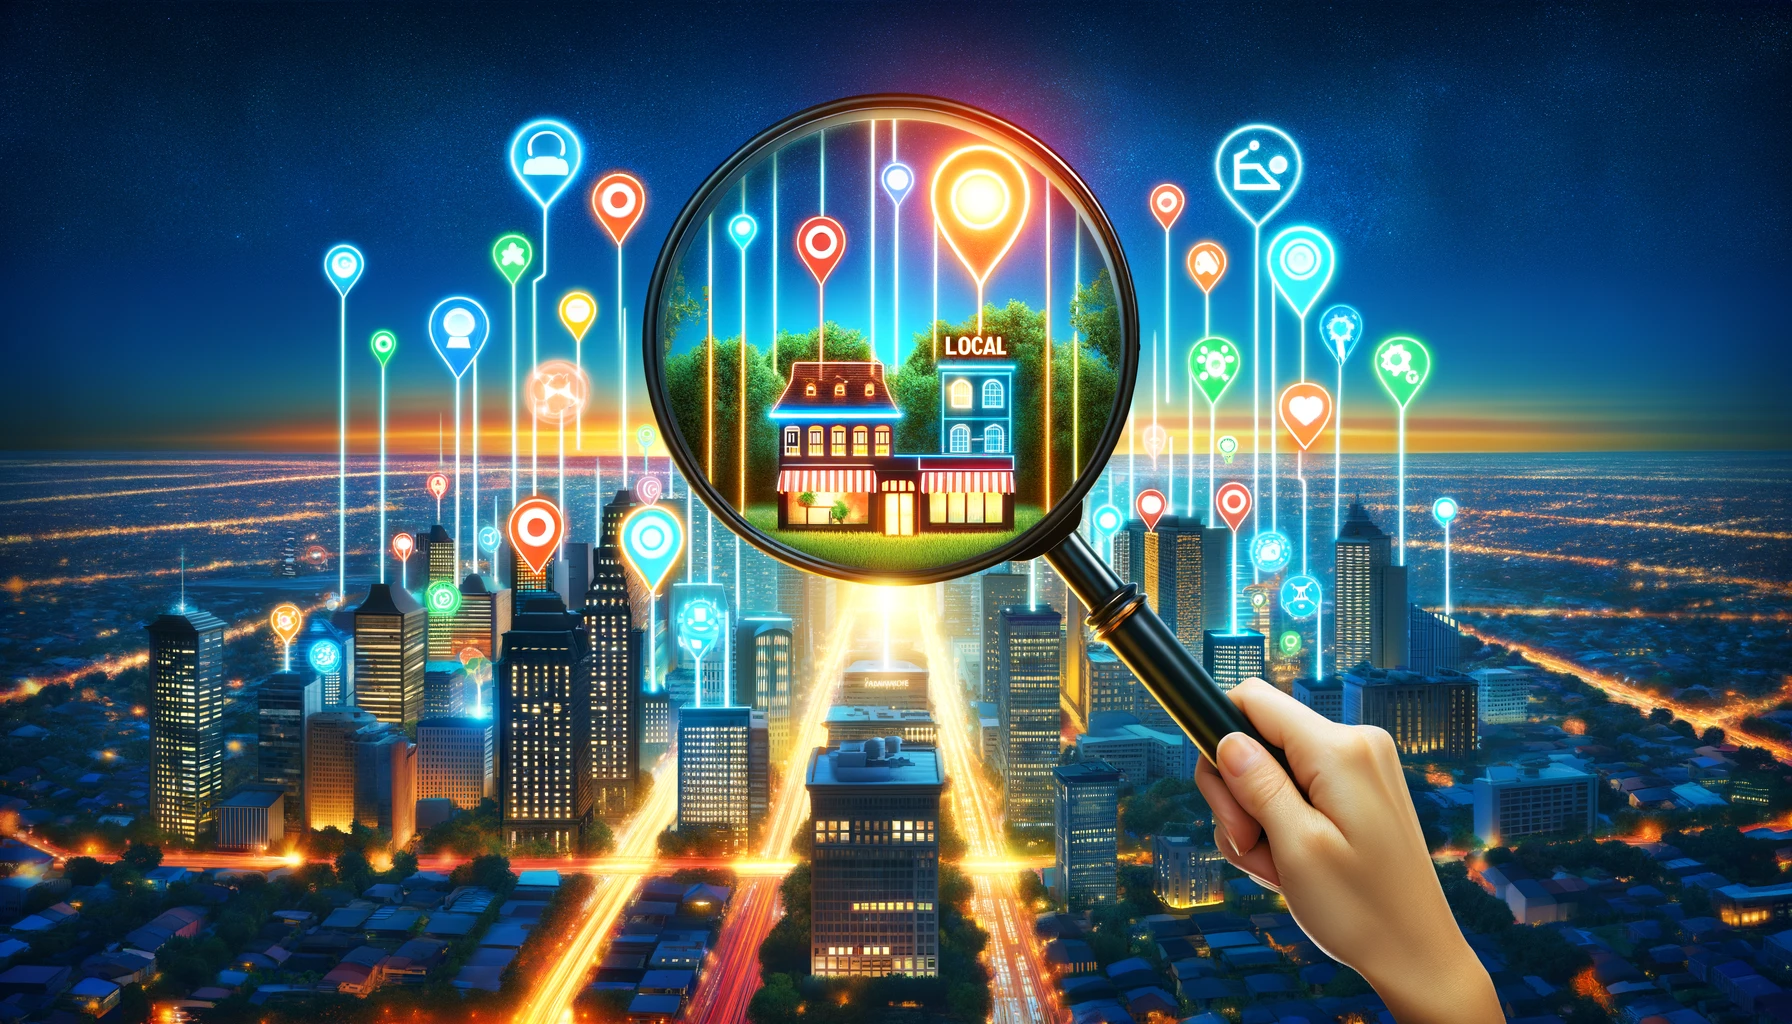 Image illustrating 'Local Keyword Targeting' with a vibrant cityscape, highlighting businesses connected by glowing lines forming local keywords, under a magnifying glass, symbolizing the precision in local SEO.